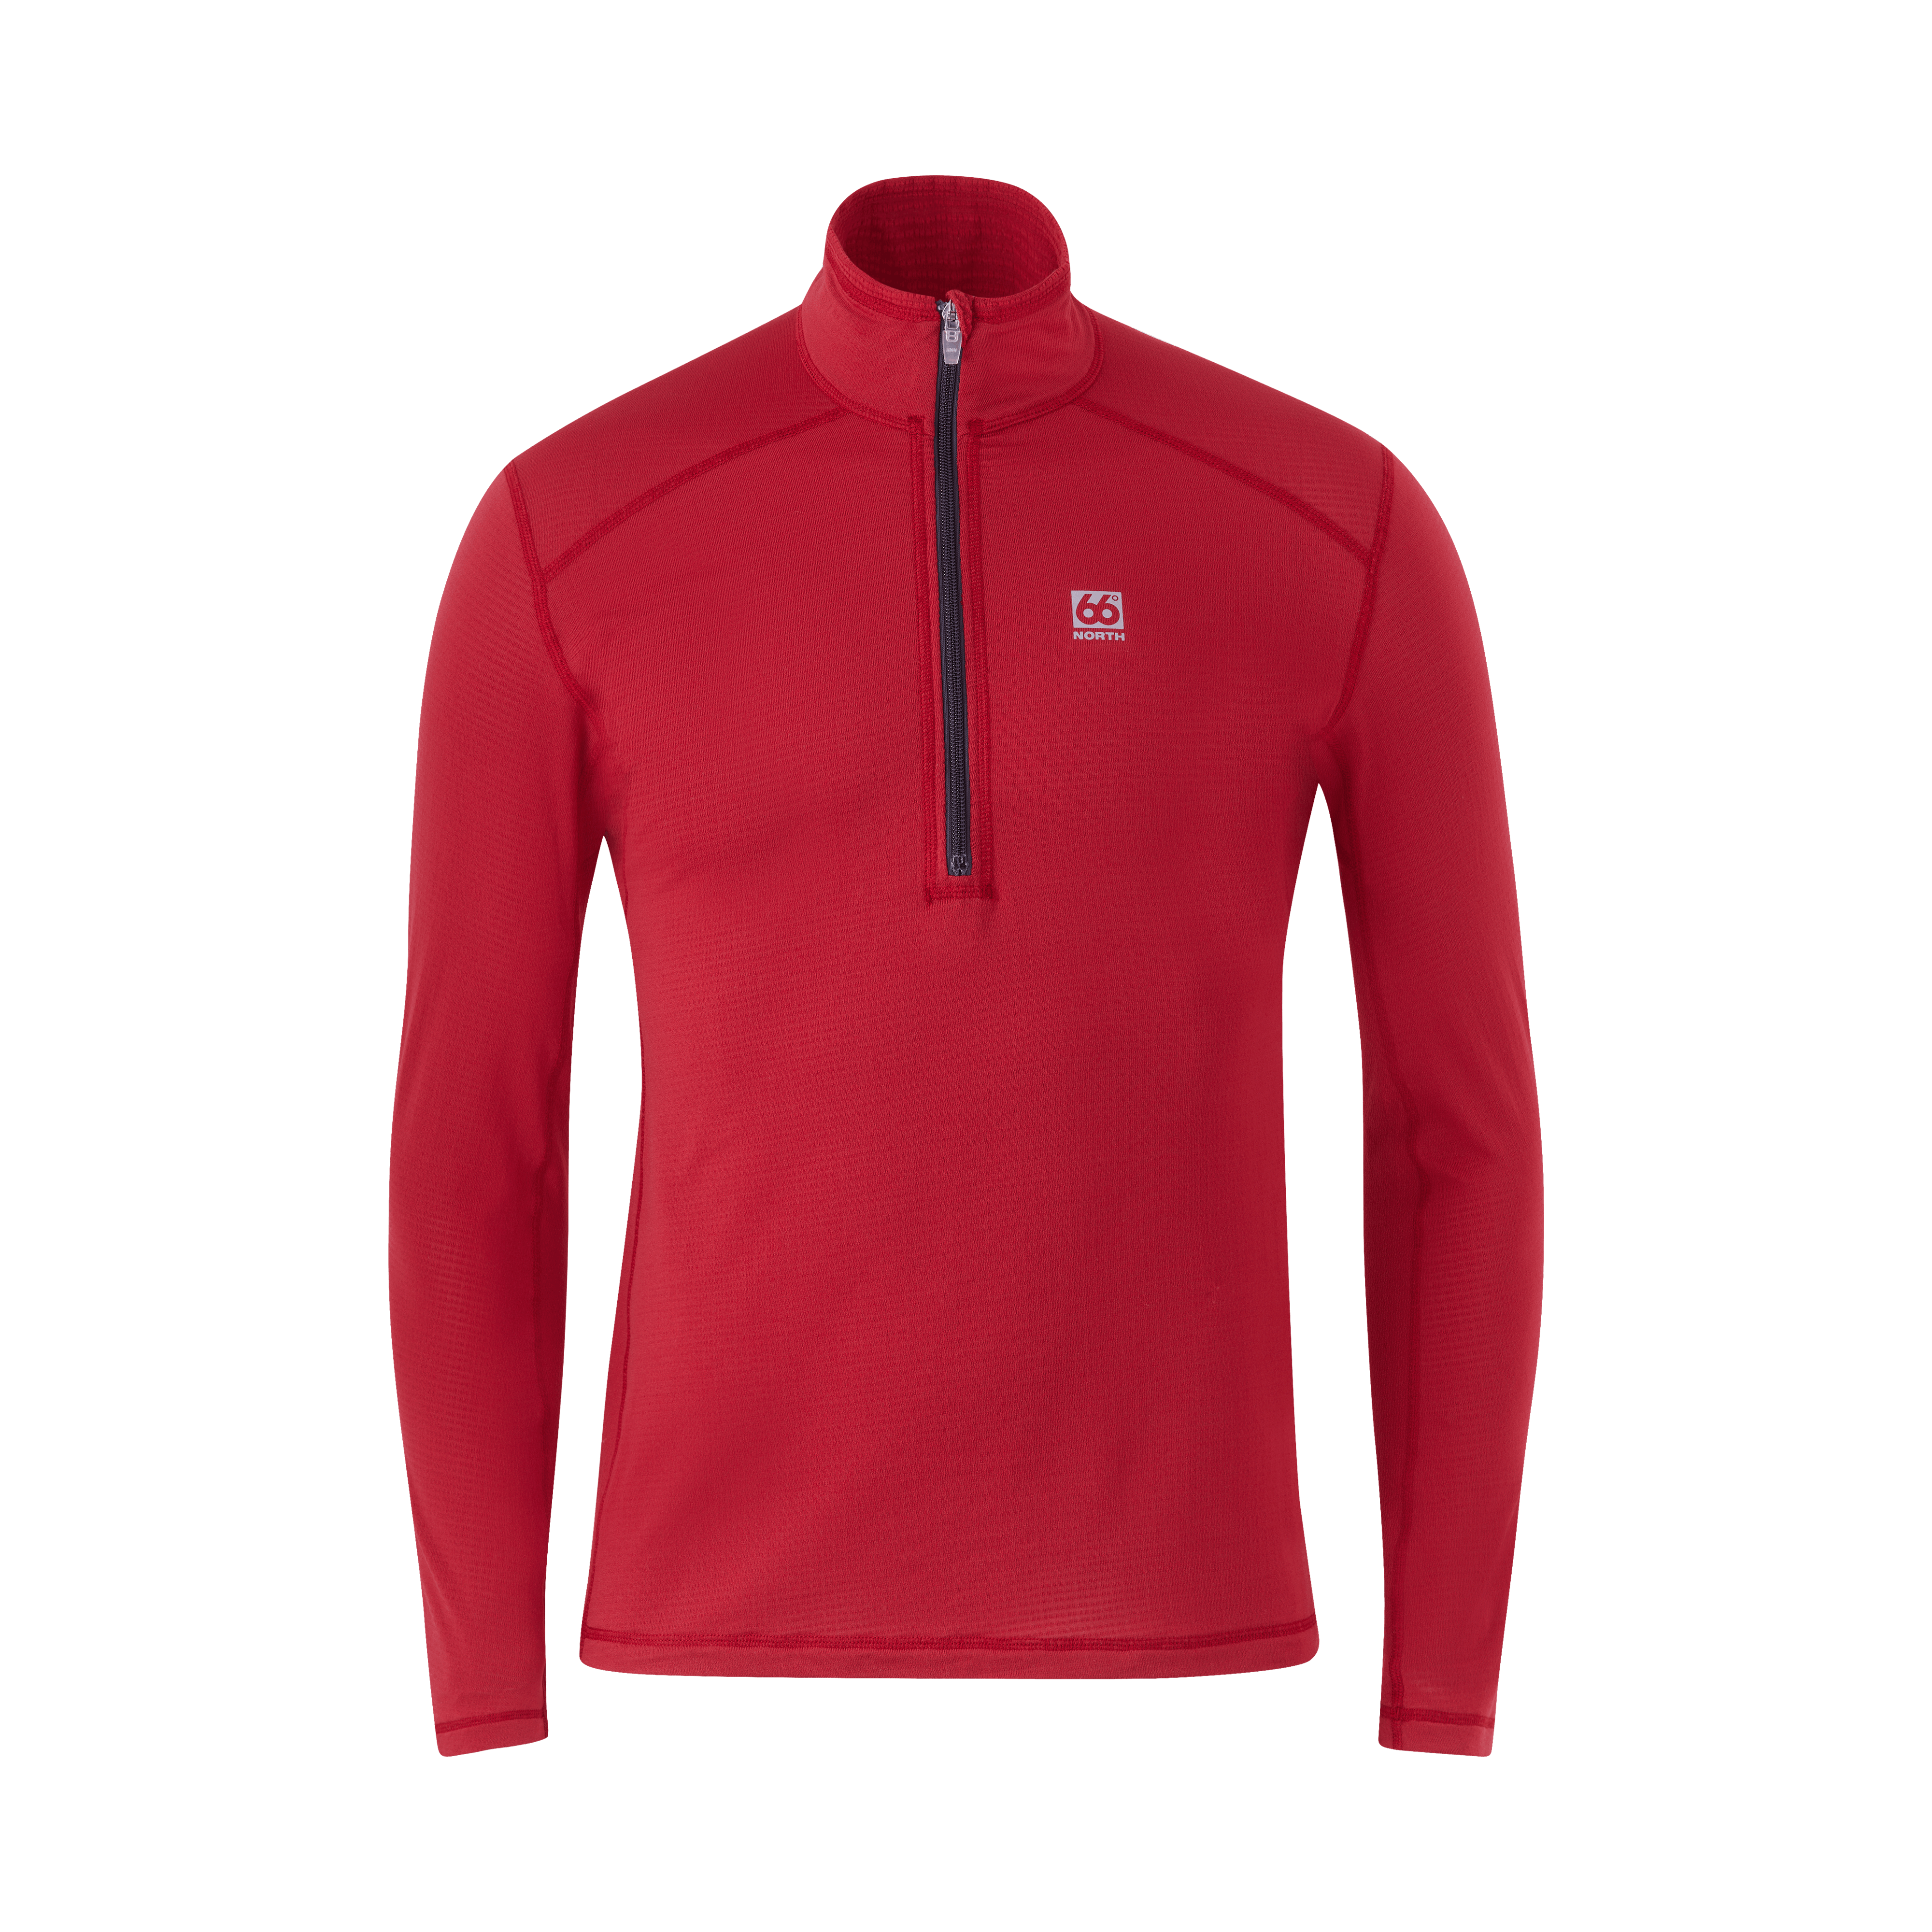 66 North Men's Straumnes Tops & Waistcoats In Blood Red